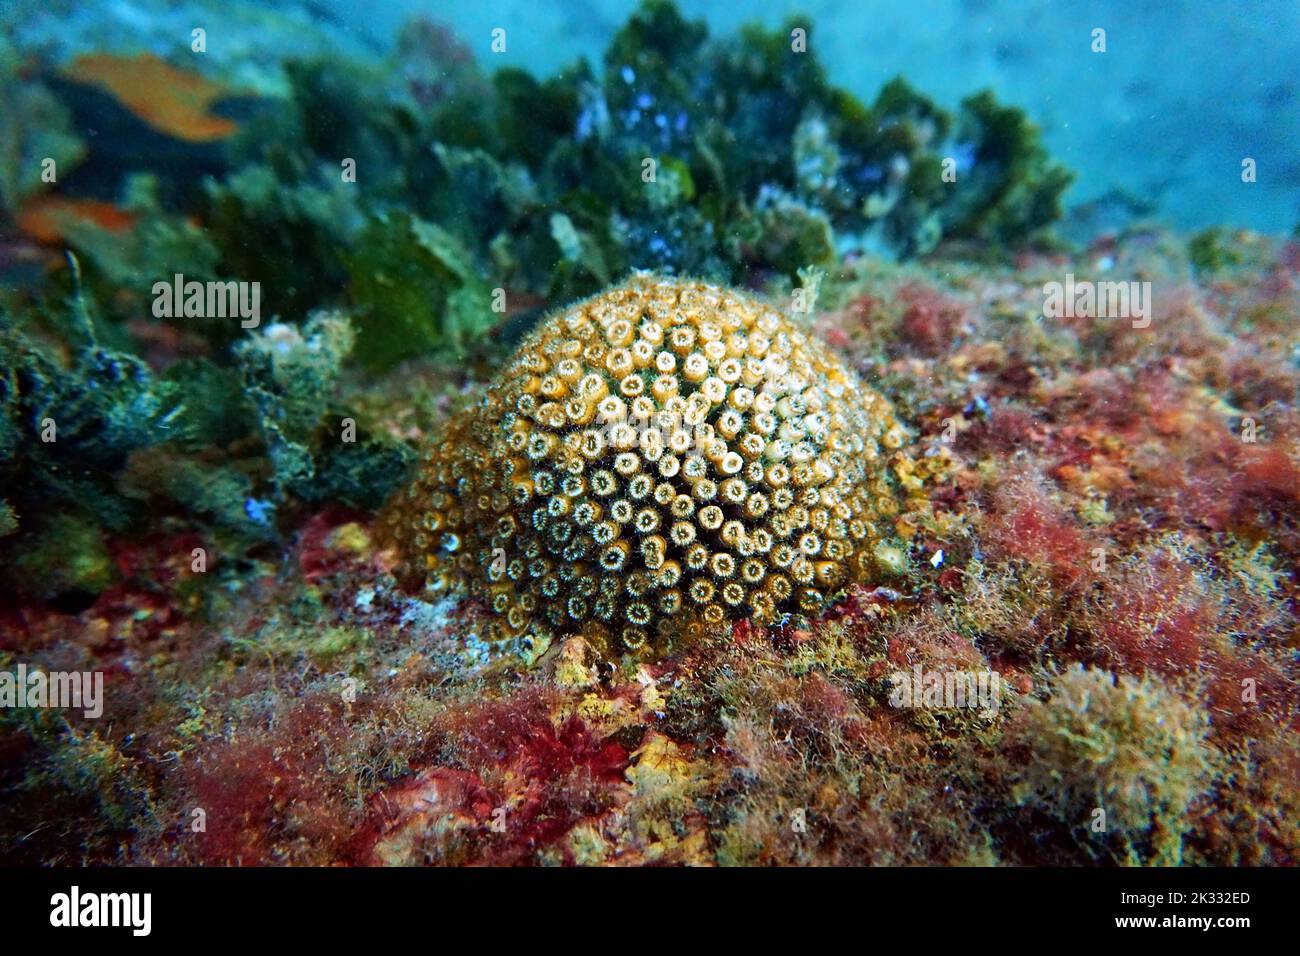 Pillow or cushion coral in to the Mediterranean sea - Cladocora caespitosa Stock Photo